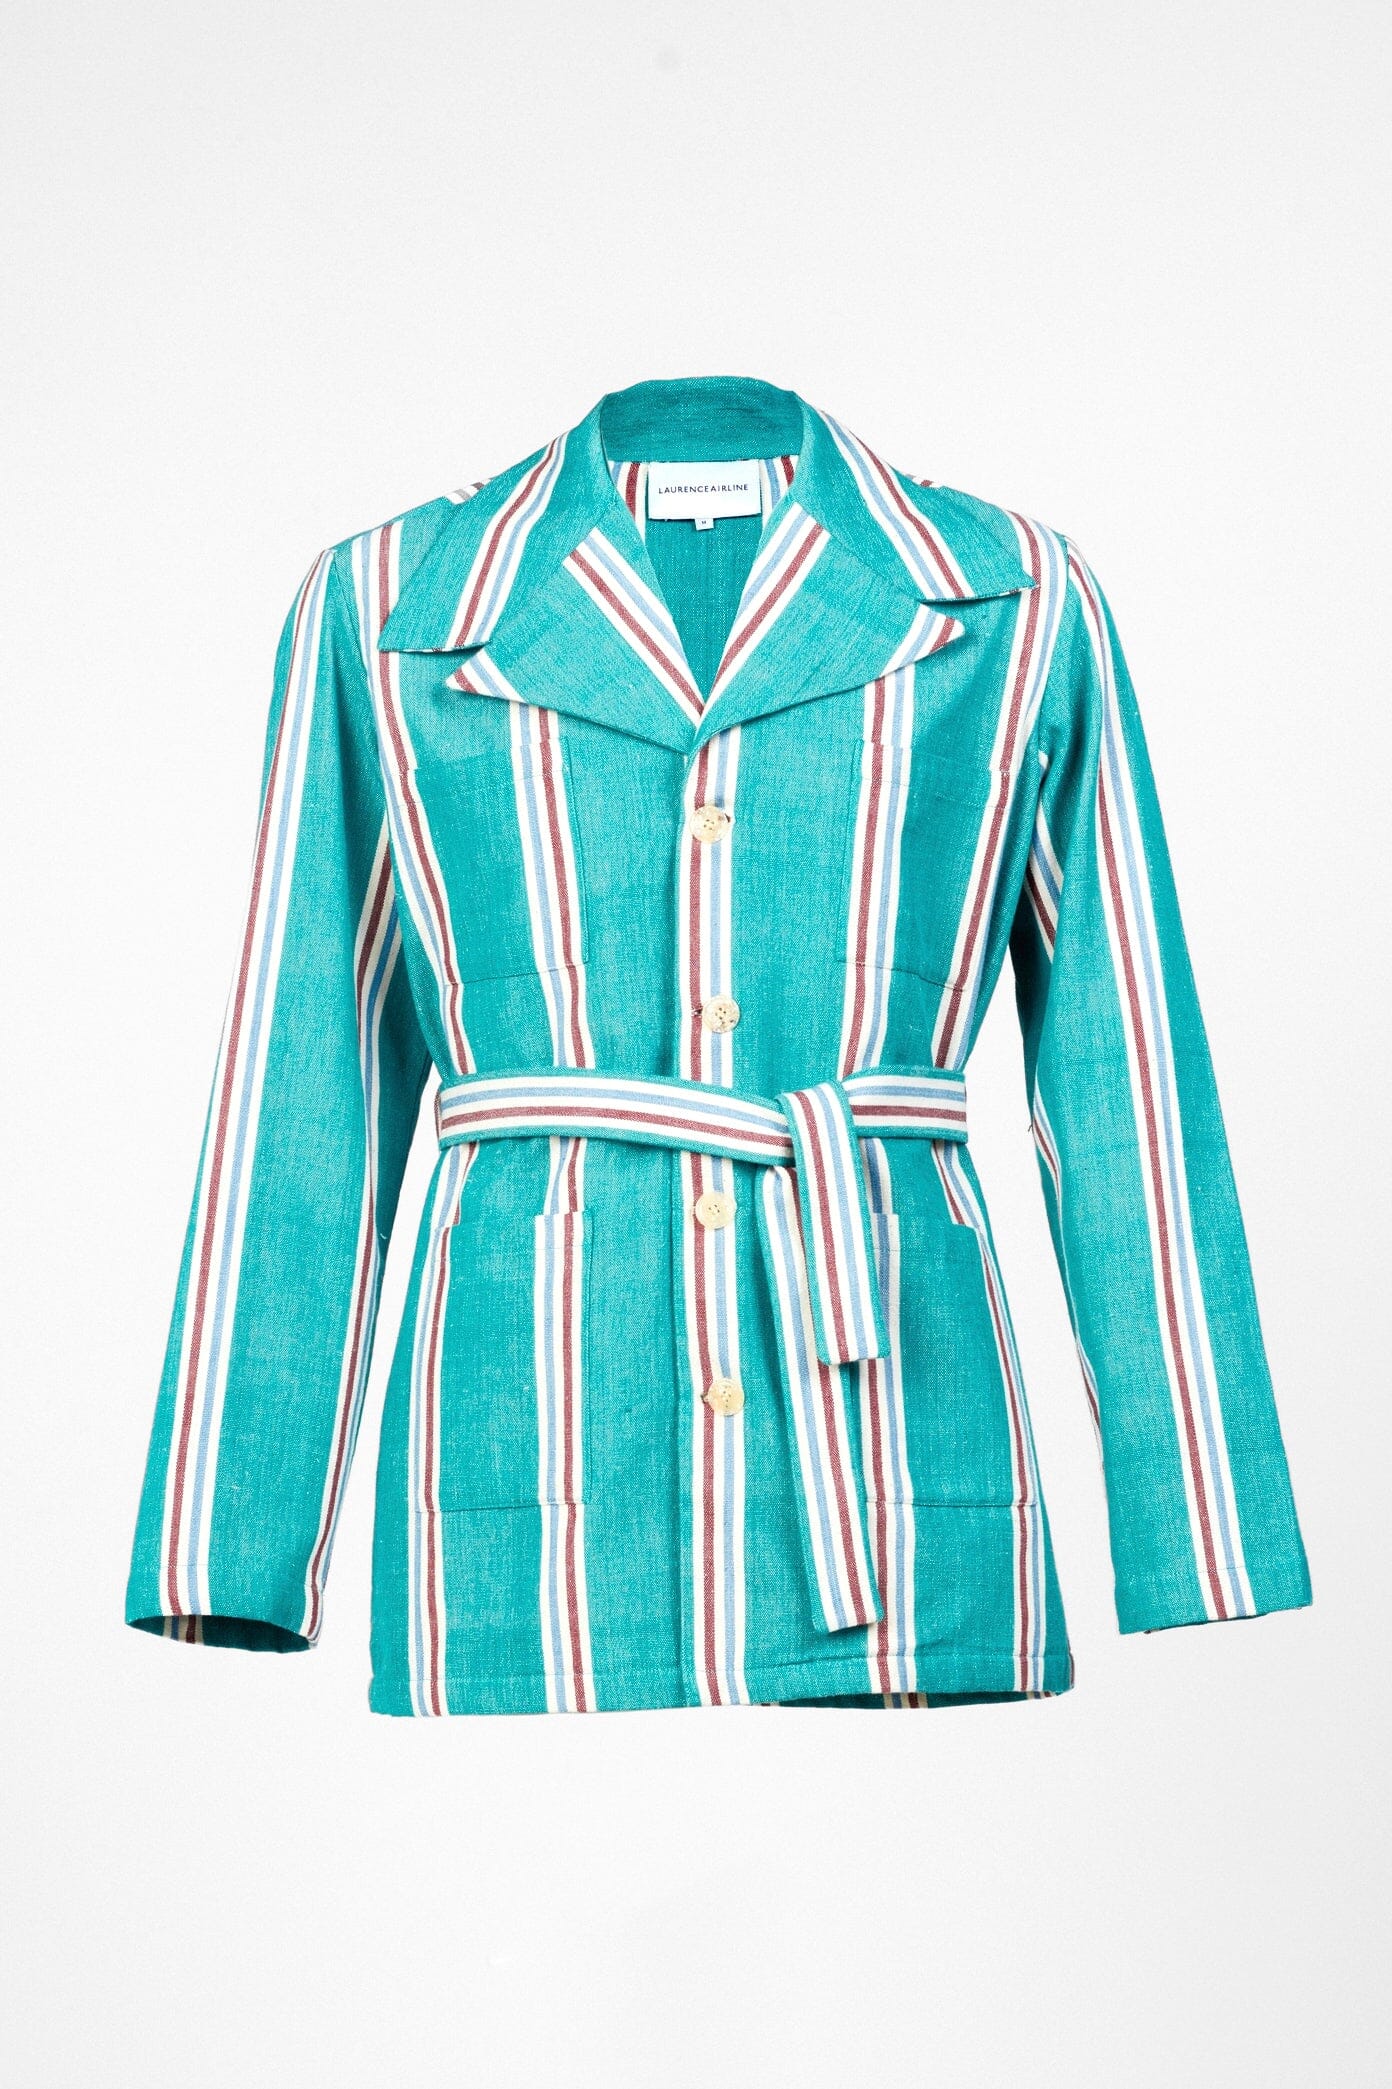 Striped Weave Jacket Outerwear New LaurenceAirline 